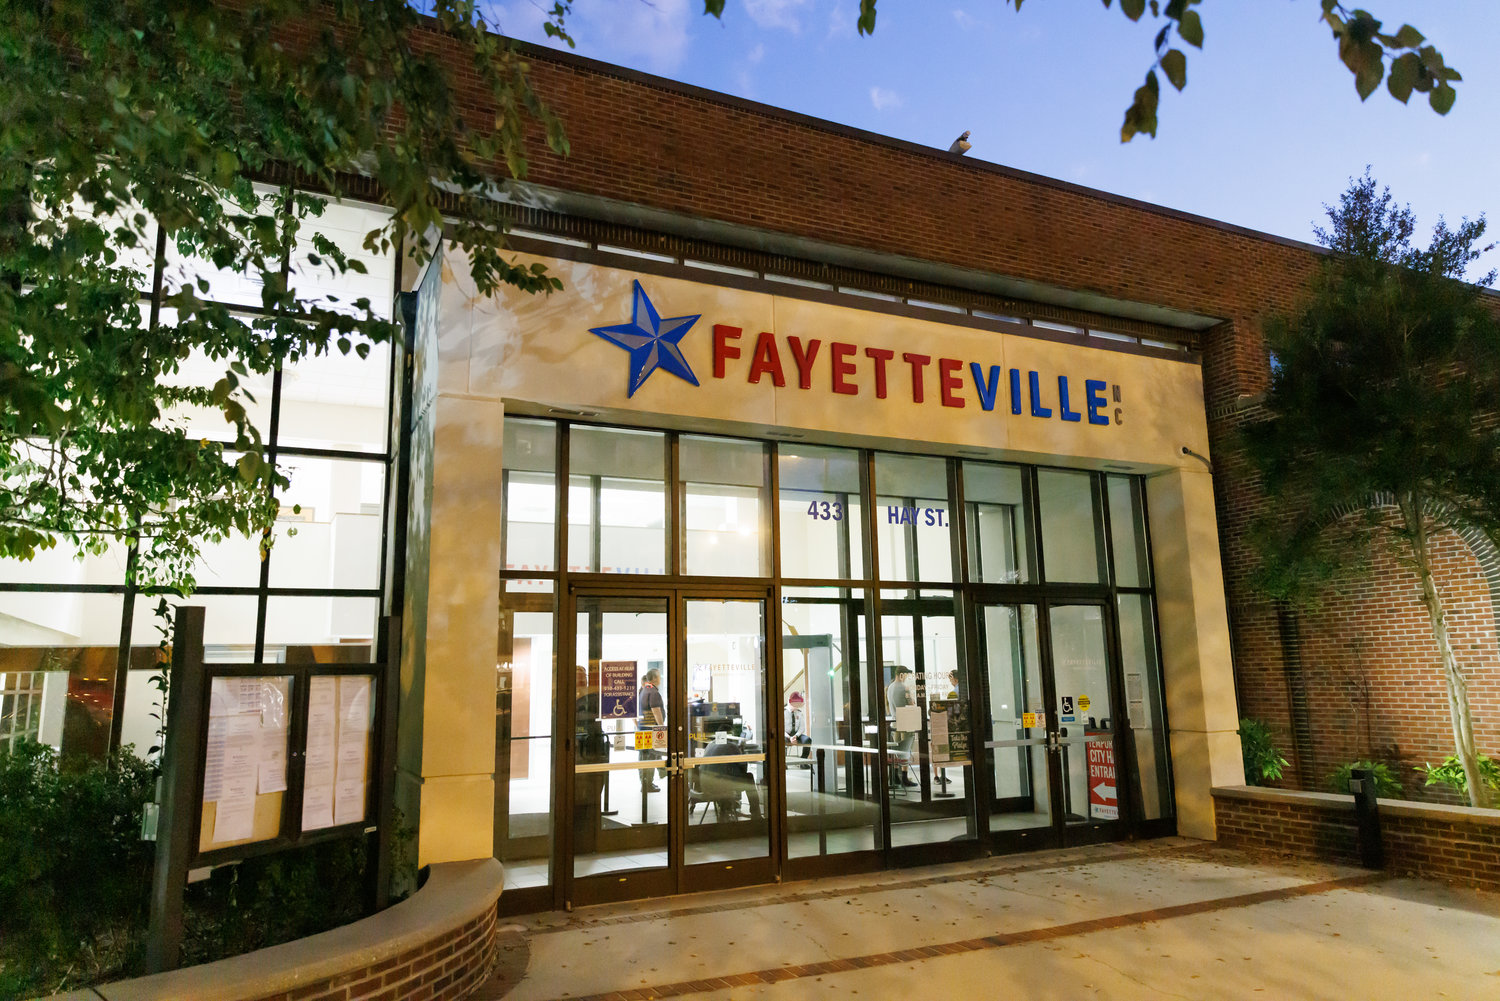 The Fayetteville City Council voted 9-1 against a proposal to extend council terms from two to four years.